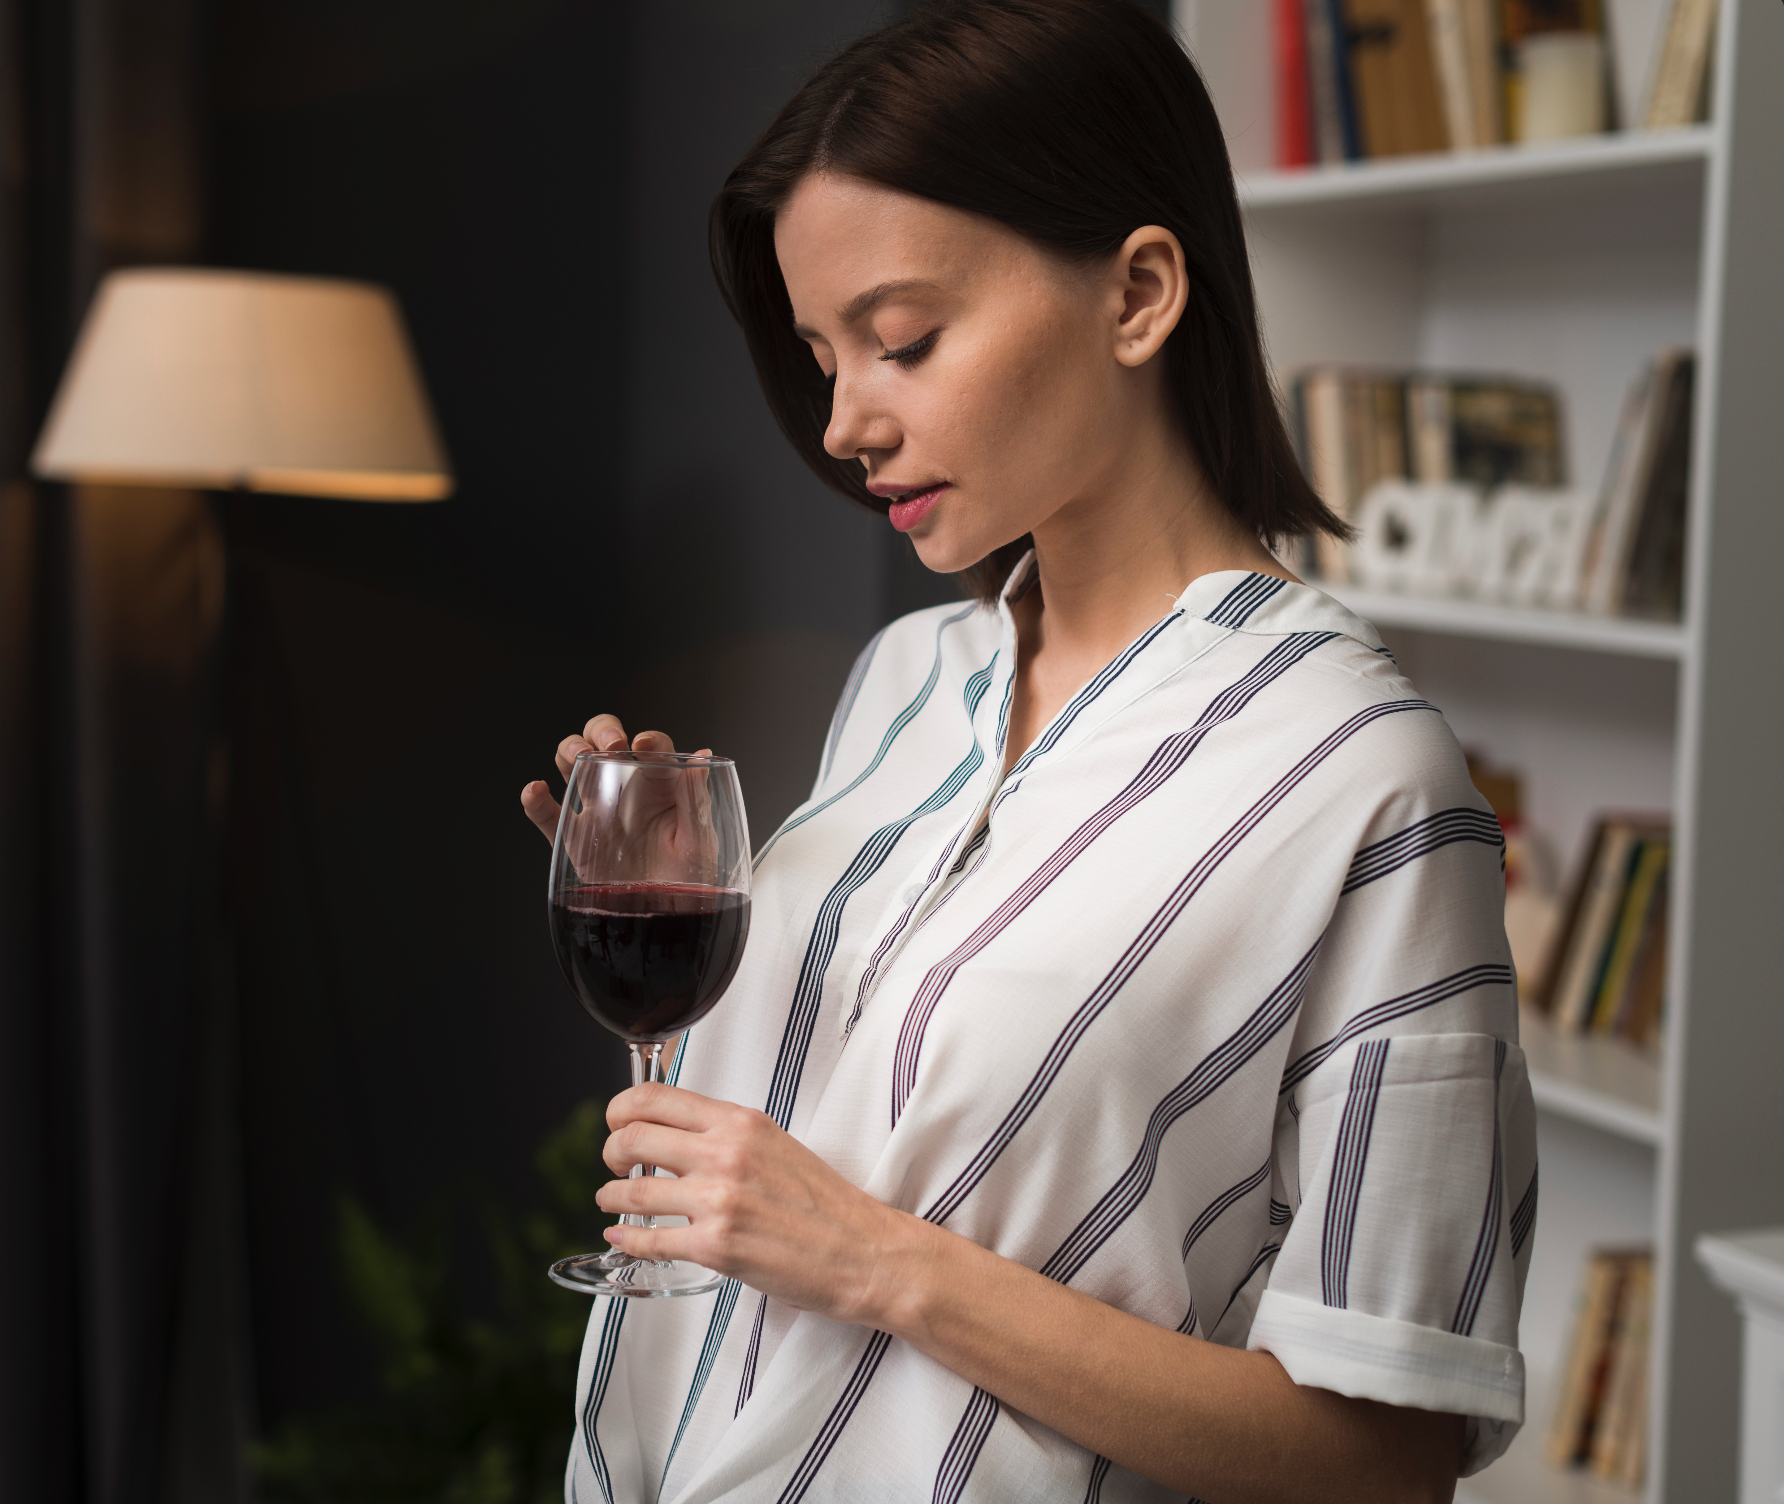 Pour choices: the sobering truth about your nightly glass of wine